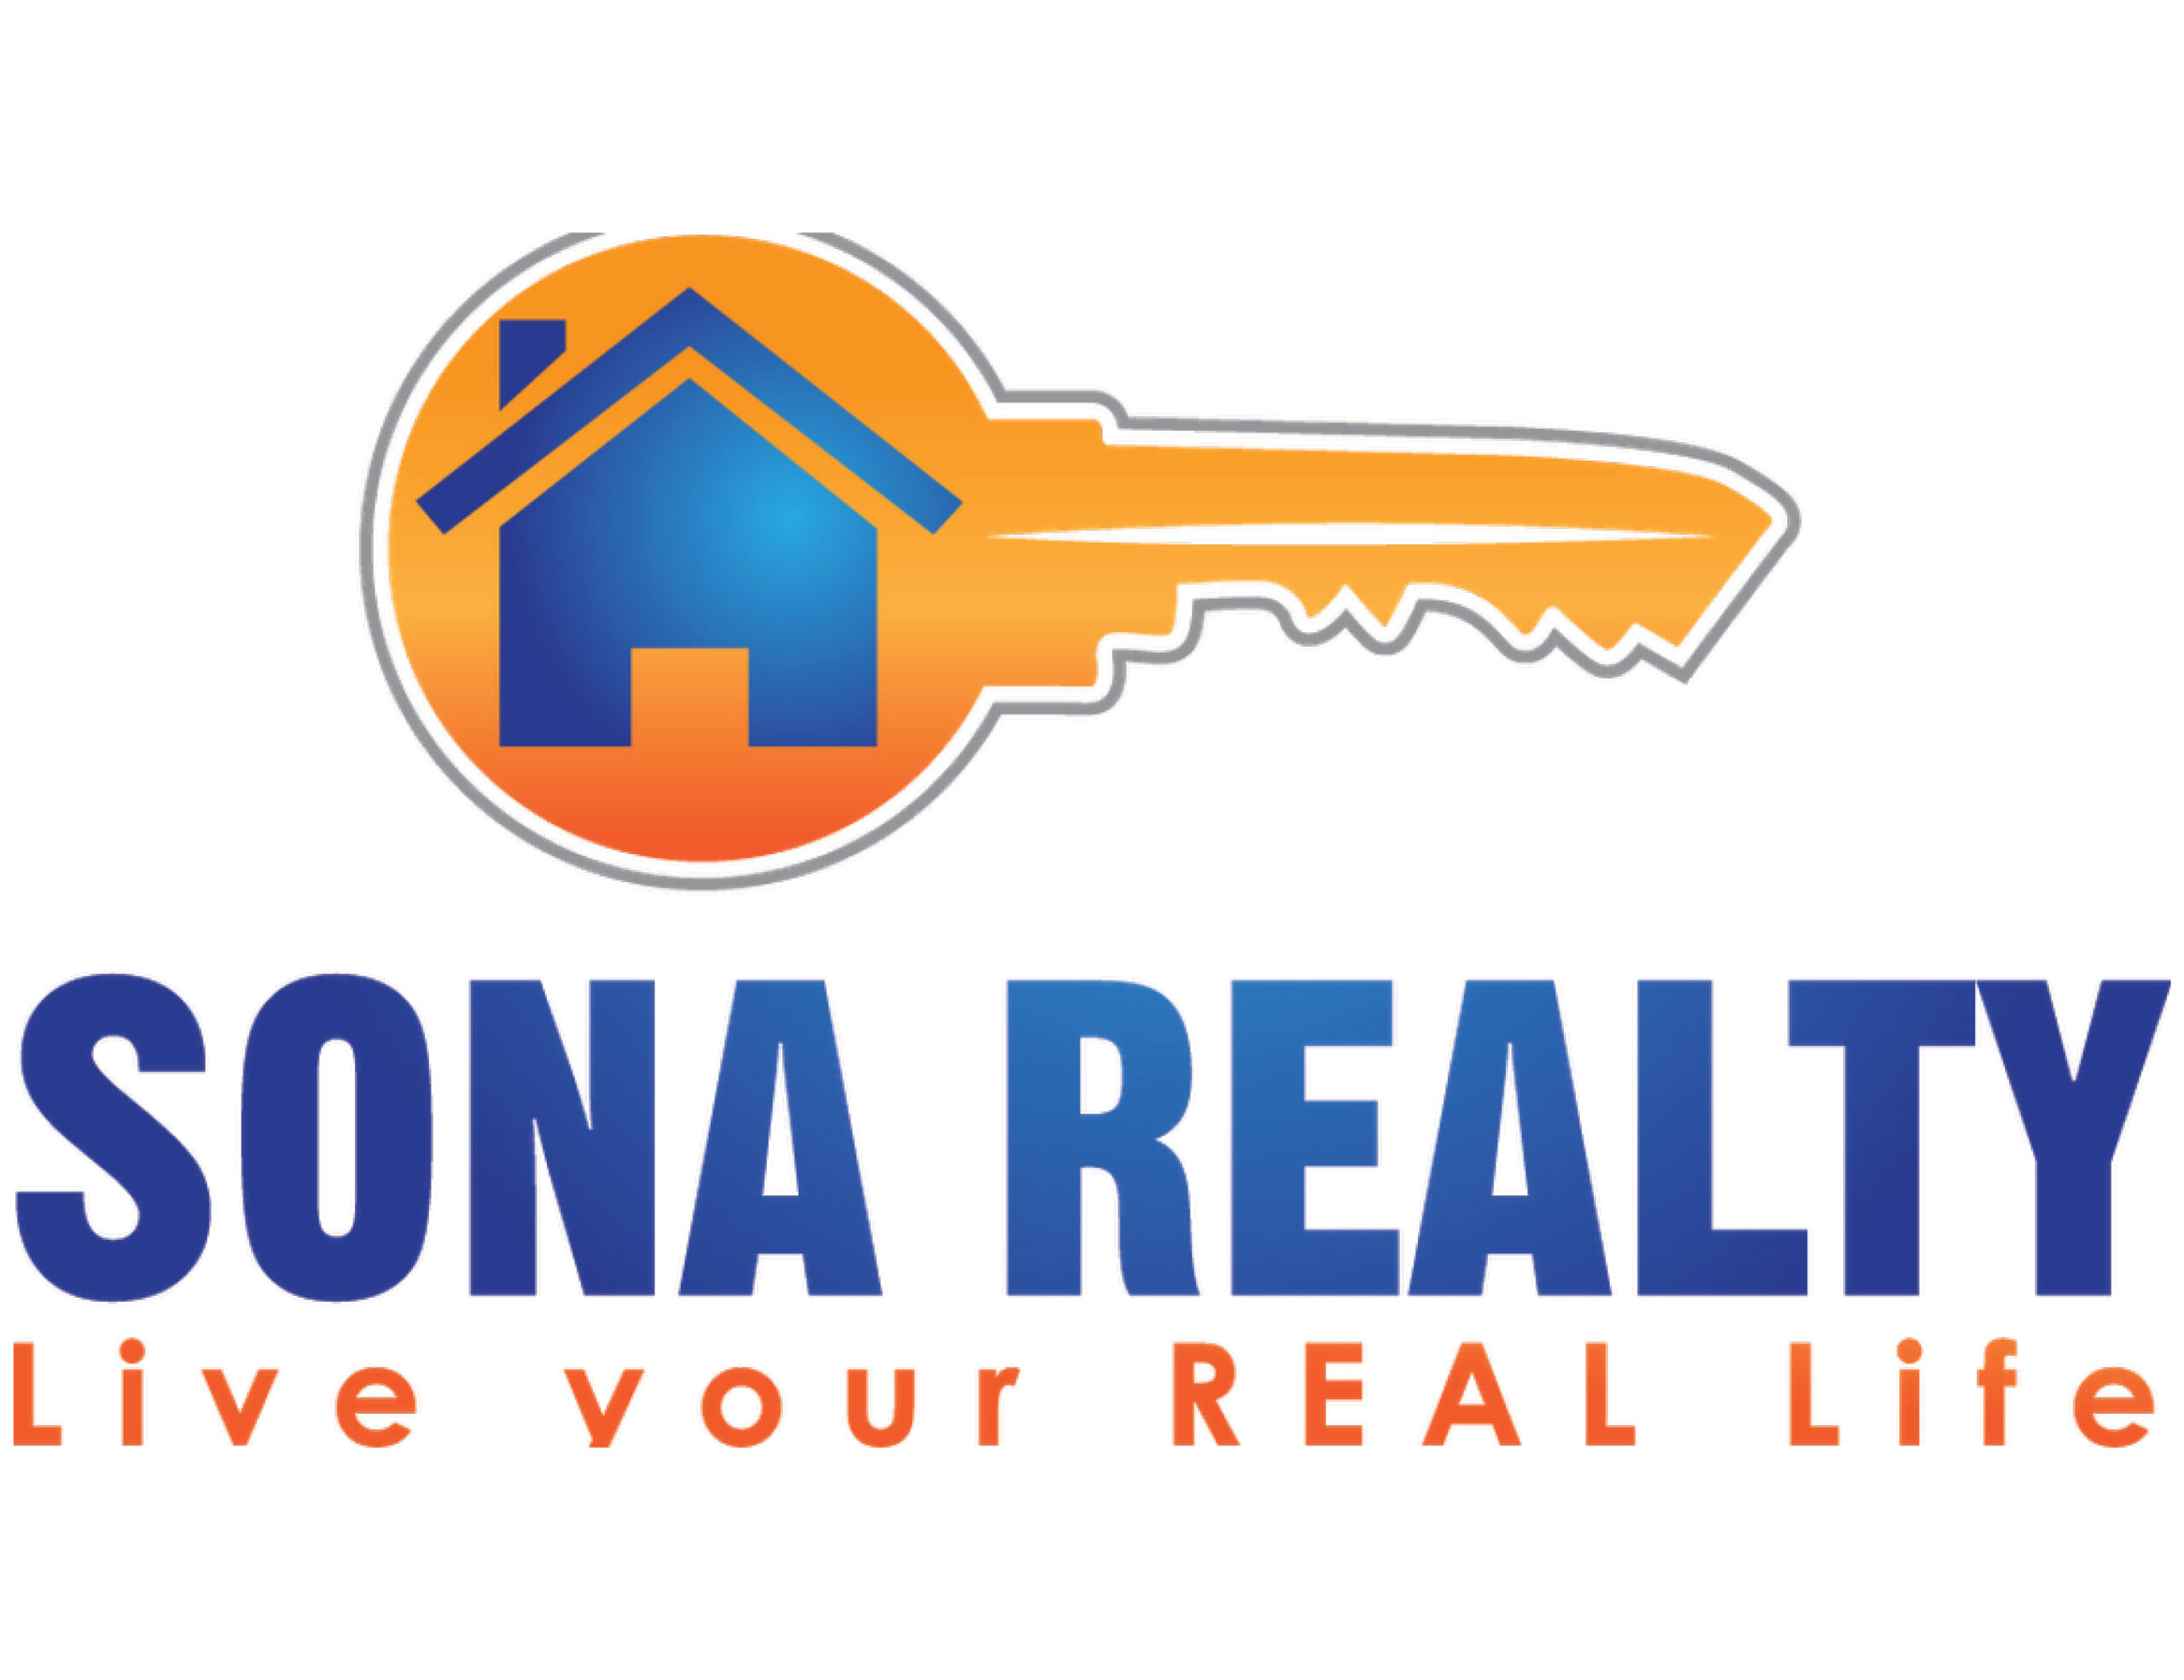 Sona Realty Live Your REAL Life